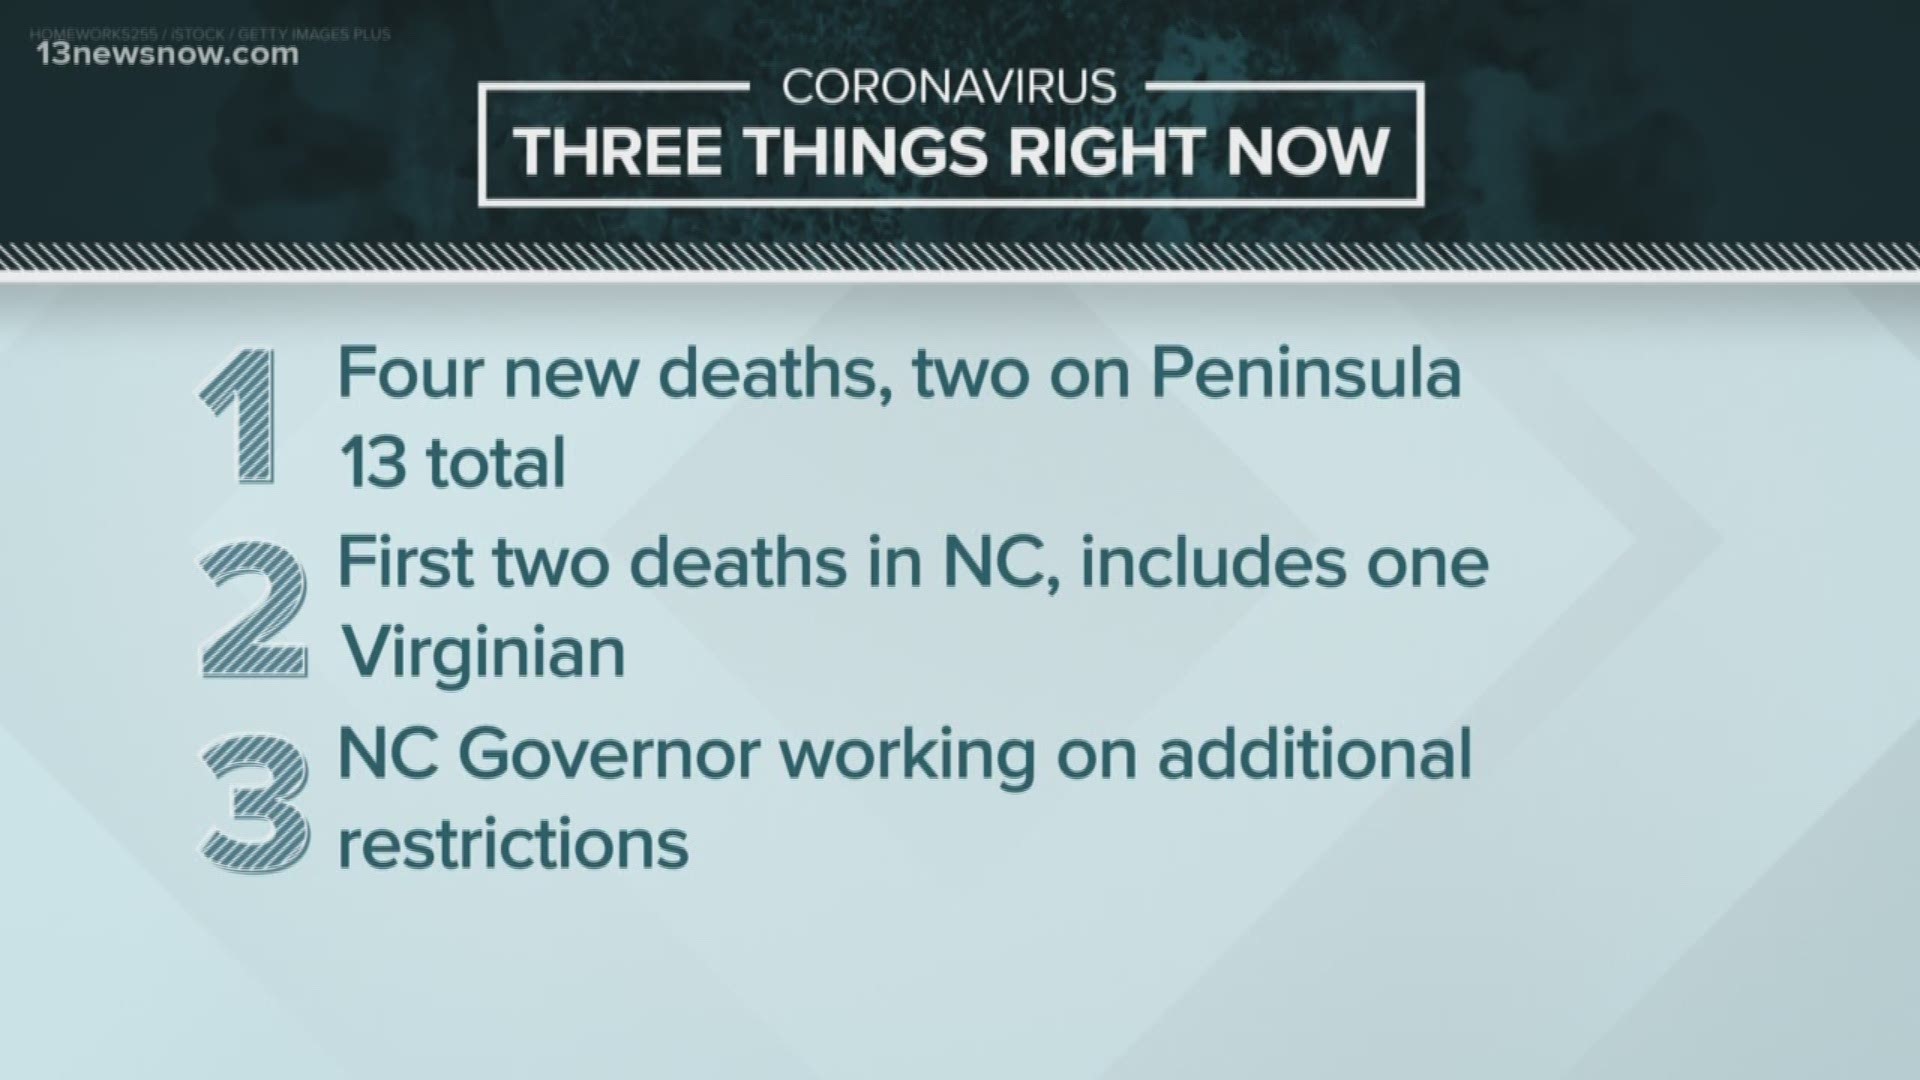 As of March 25, the Virginia Department of Health says close to 400 people have tested positive for COVID-19.